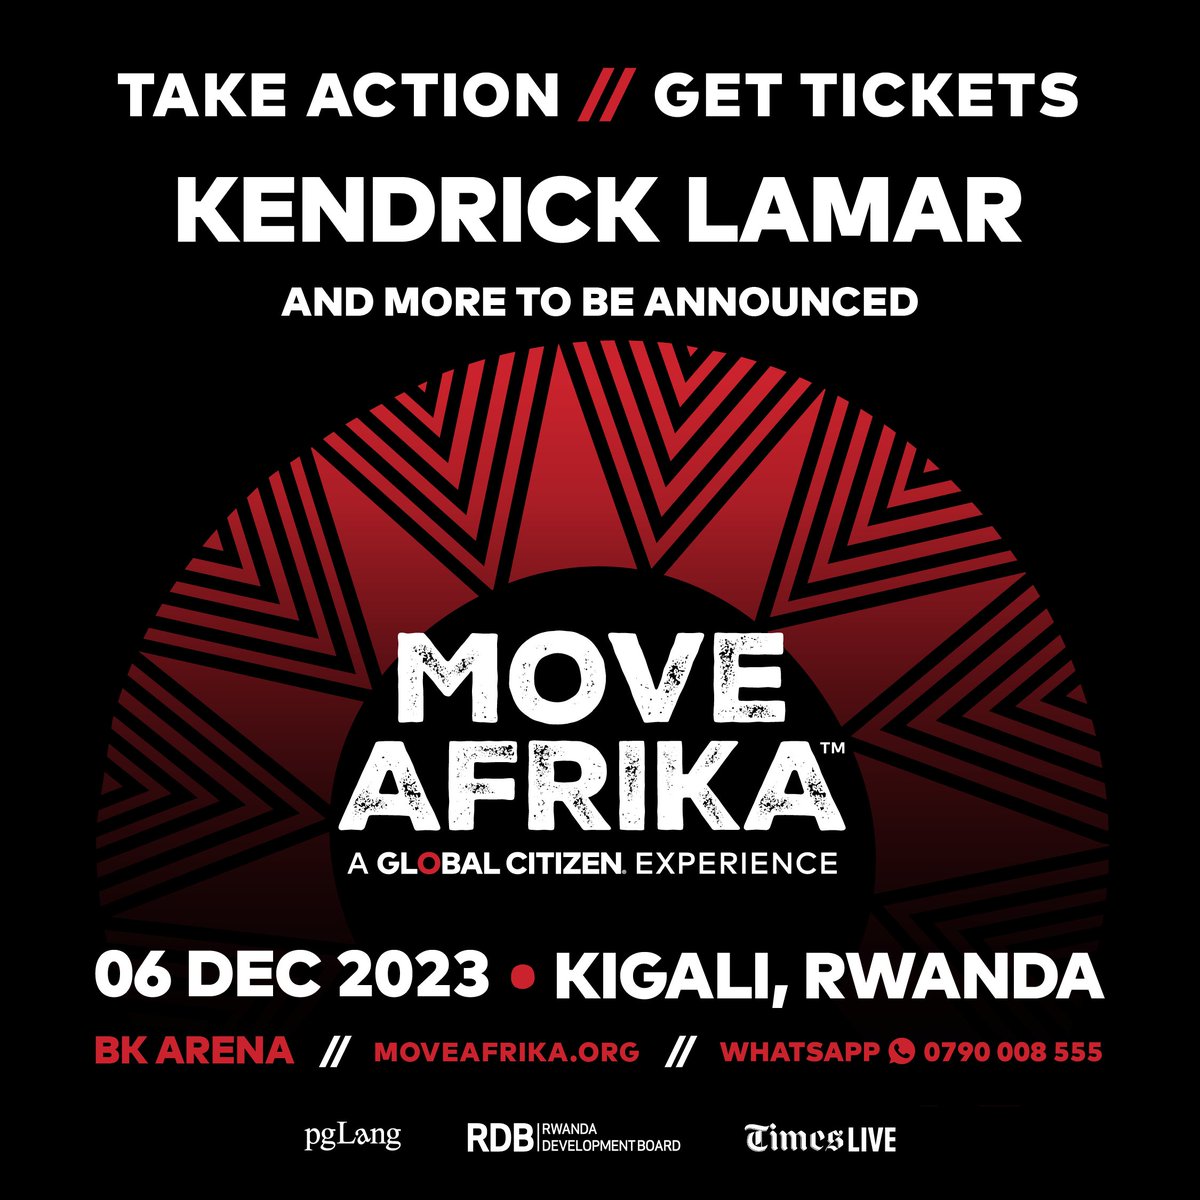 Global Citizens, grab those calendars 📆 On Dec. 6, 2023, Global Citizen is heading to Kigali, Rwanda with @kendricklamar for #MoveAfrika: Rwanda! 🇷🇼 Learn more about how you can join us: glblctzn.me/moveafrika-rwa…